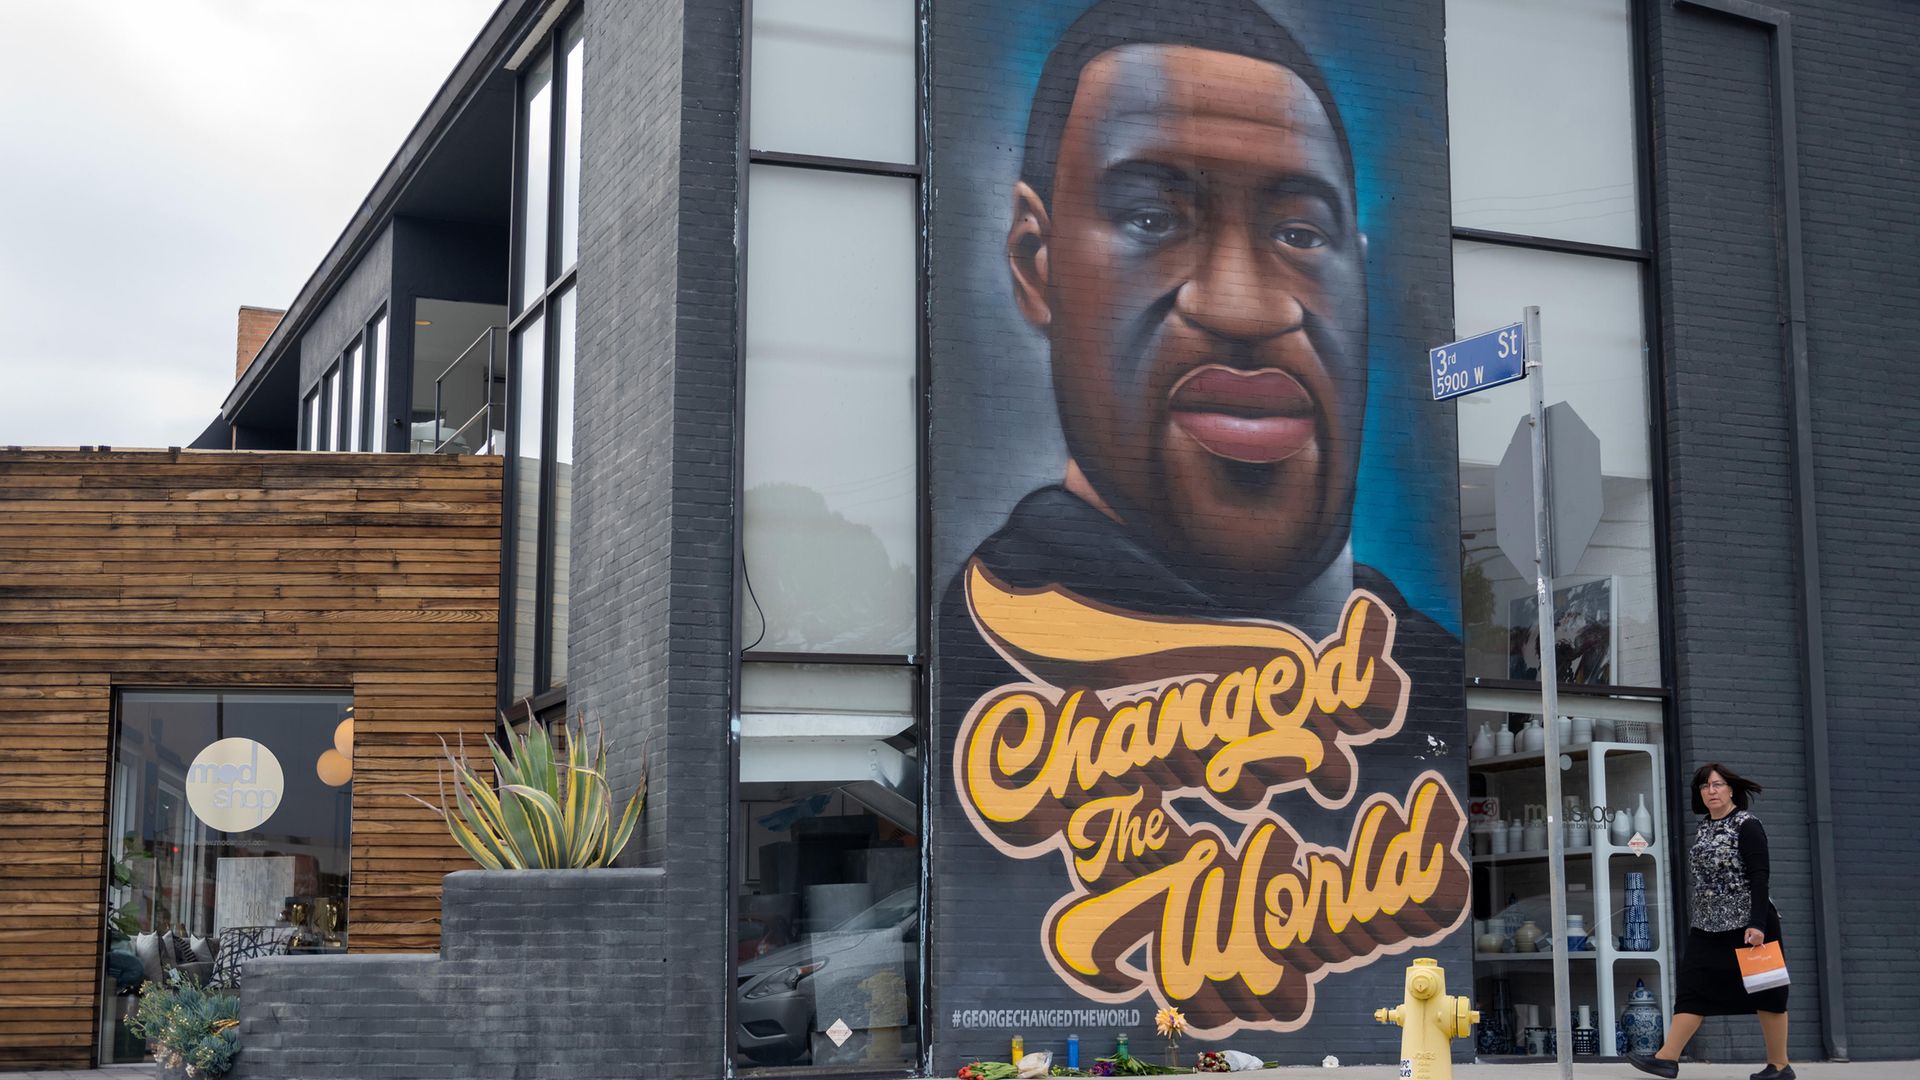 A woman without a mask walks past a mural of George Floyd  on April 21, 2021 in Los Angeles, California - Credit: Photo by Alexi Rosenfeld/Getty Images